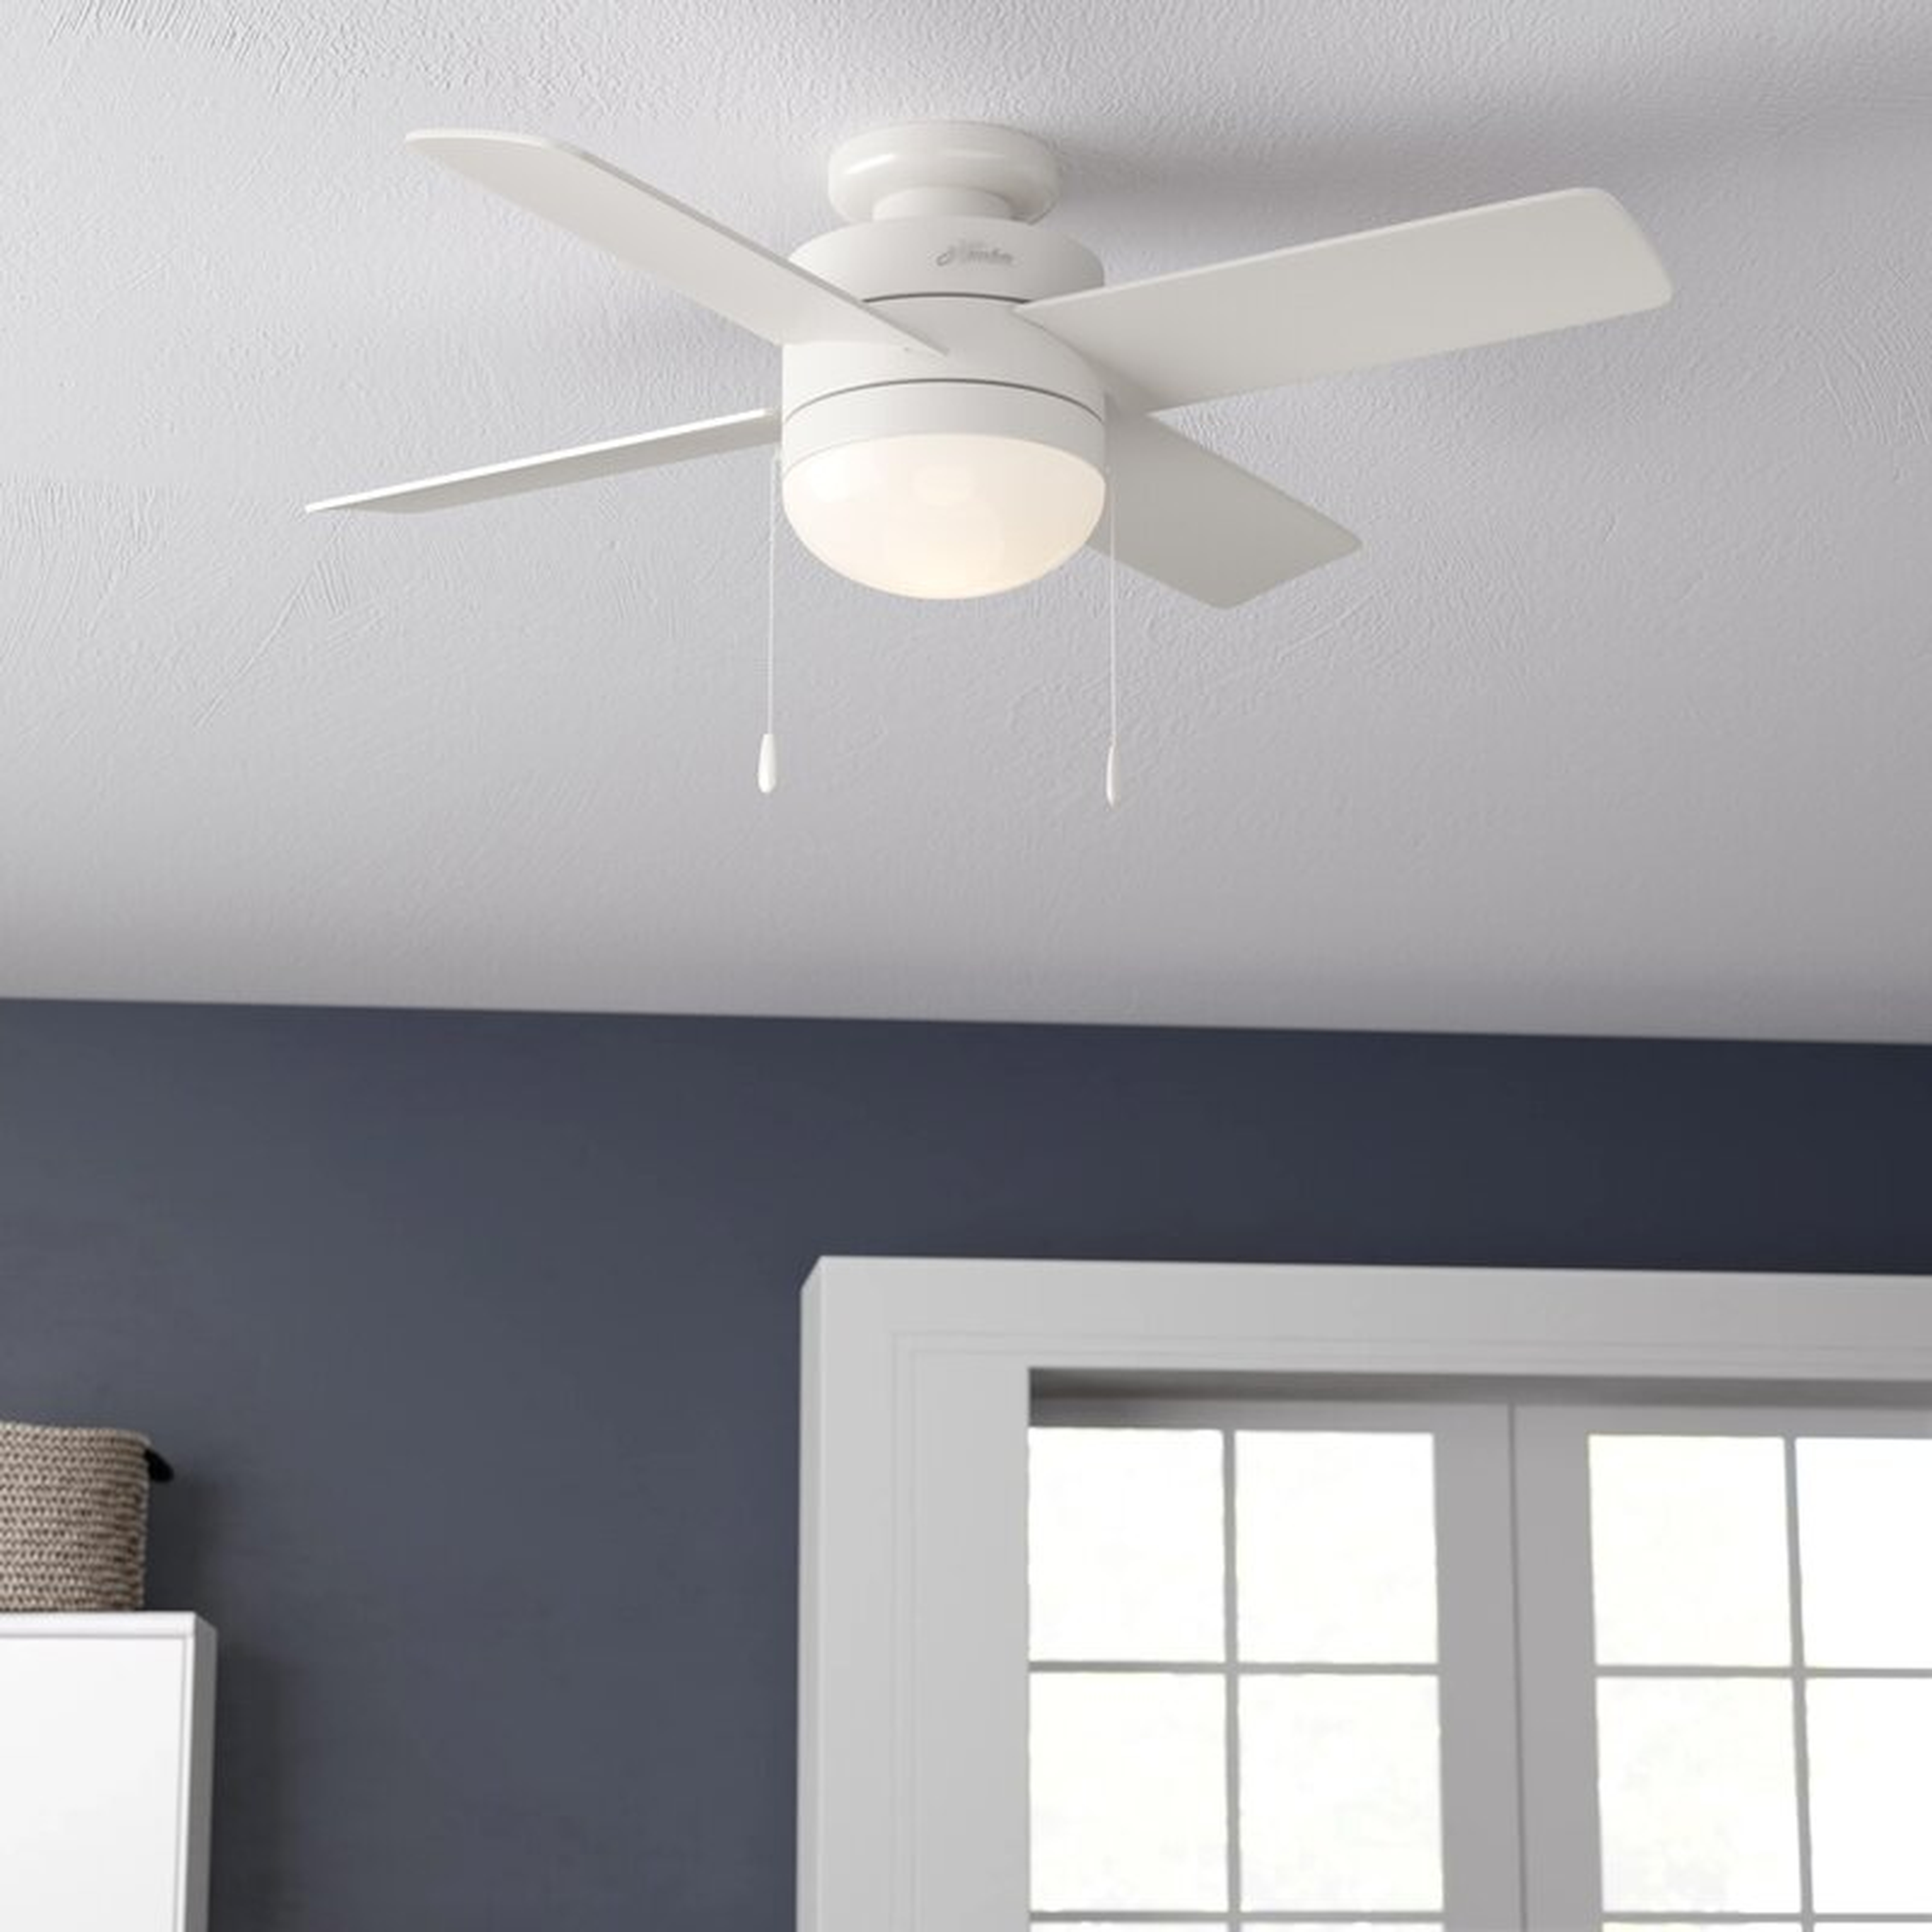 44" Timpani 4 - Blade Flush Mount Ceiling Fan with Pull Chain and Light Kit Included - Wayfair